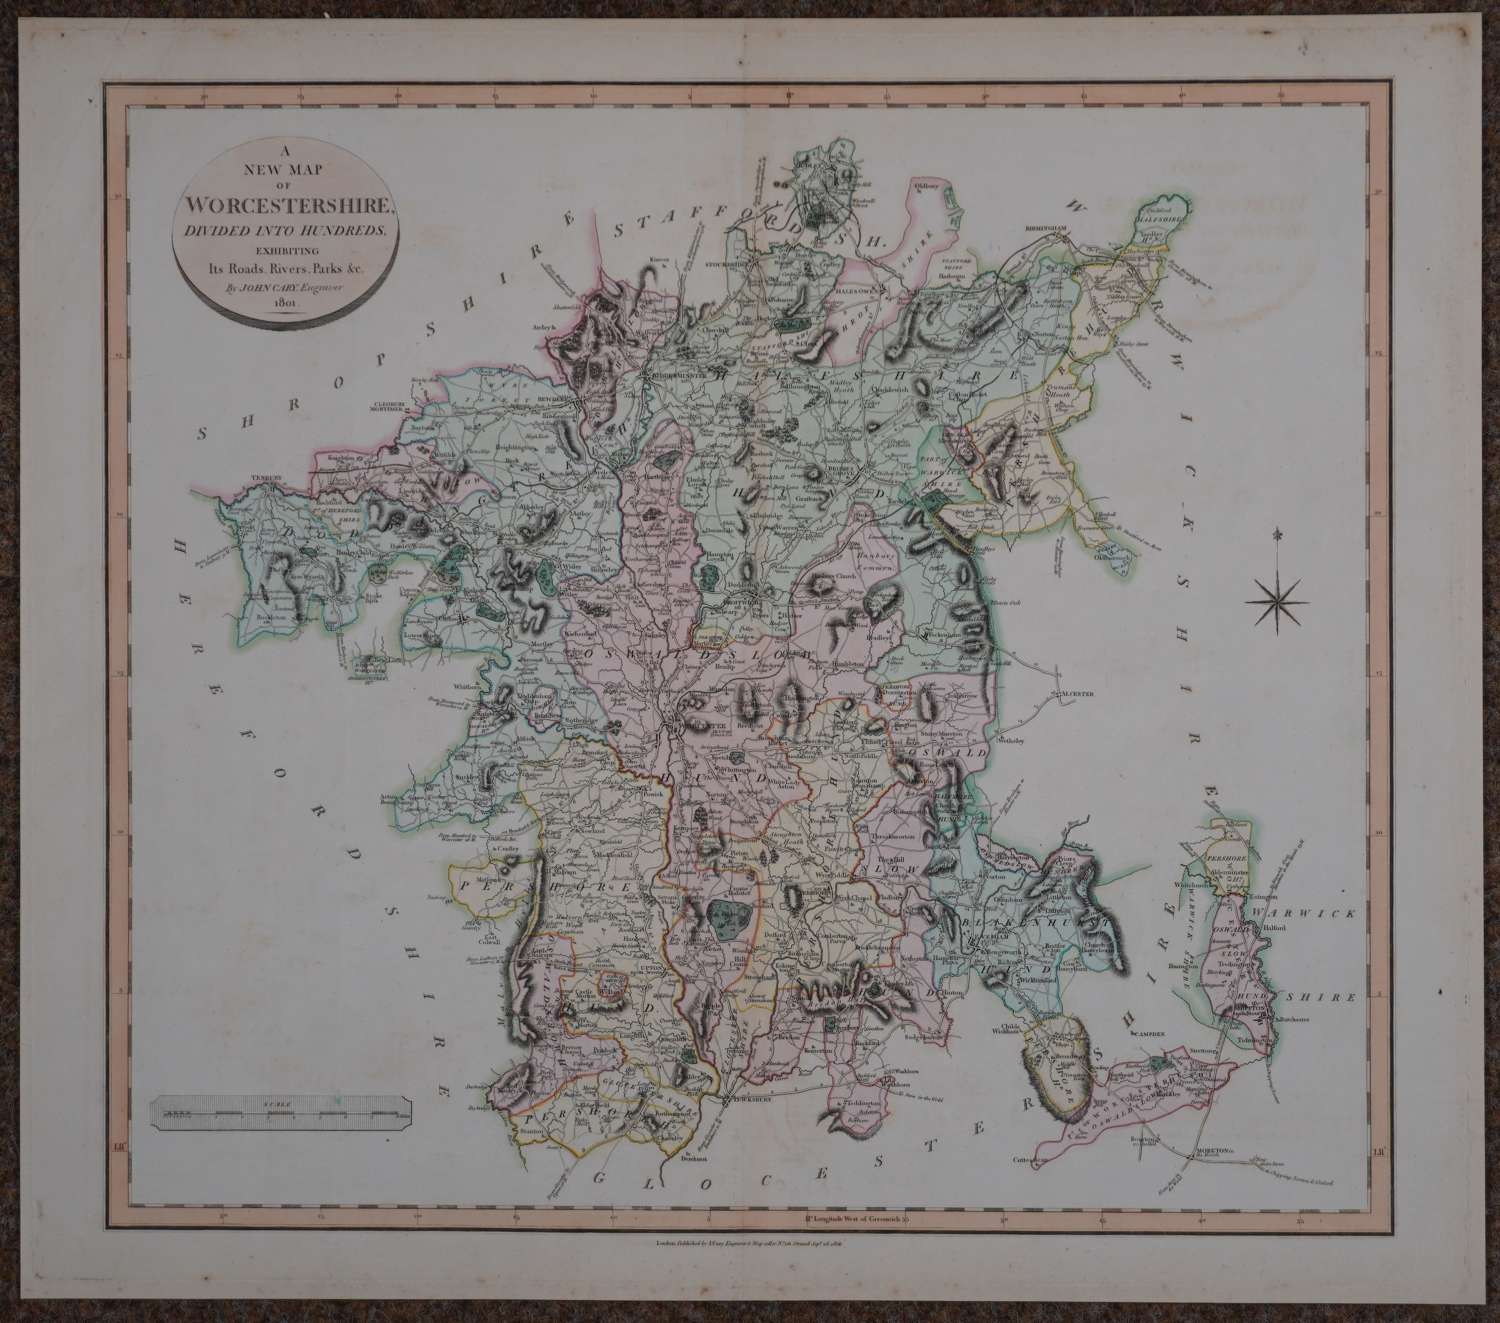 A New Map of Worcestershire by John Cary